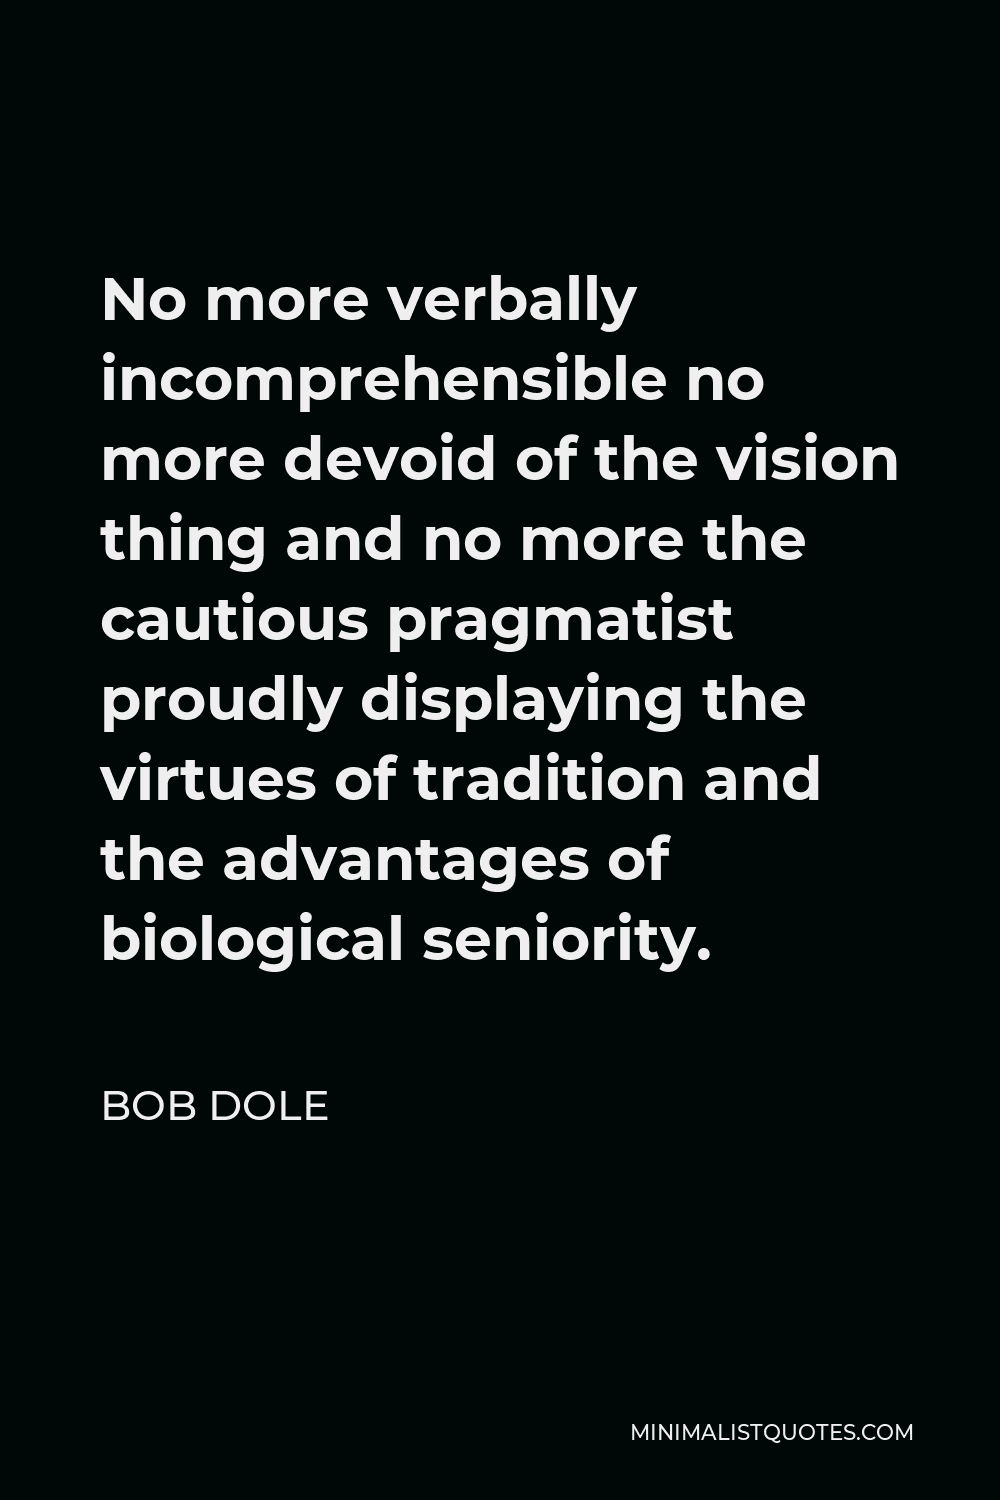 Bob Dole Quote - No more verbally incomprehensible no more devoid of the vision thing and no more the cautious pragmatist proudly displaying the virtues of tradition and the advantages of biological seniority.